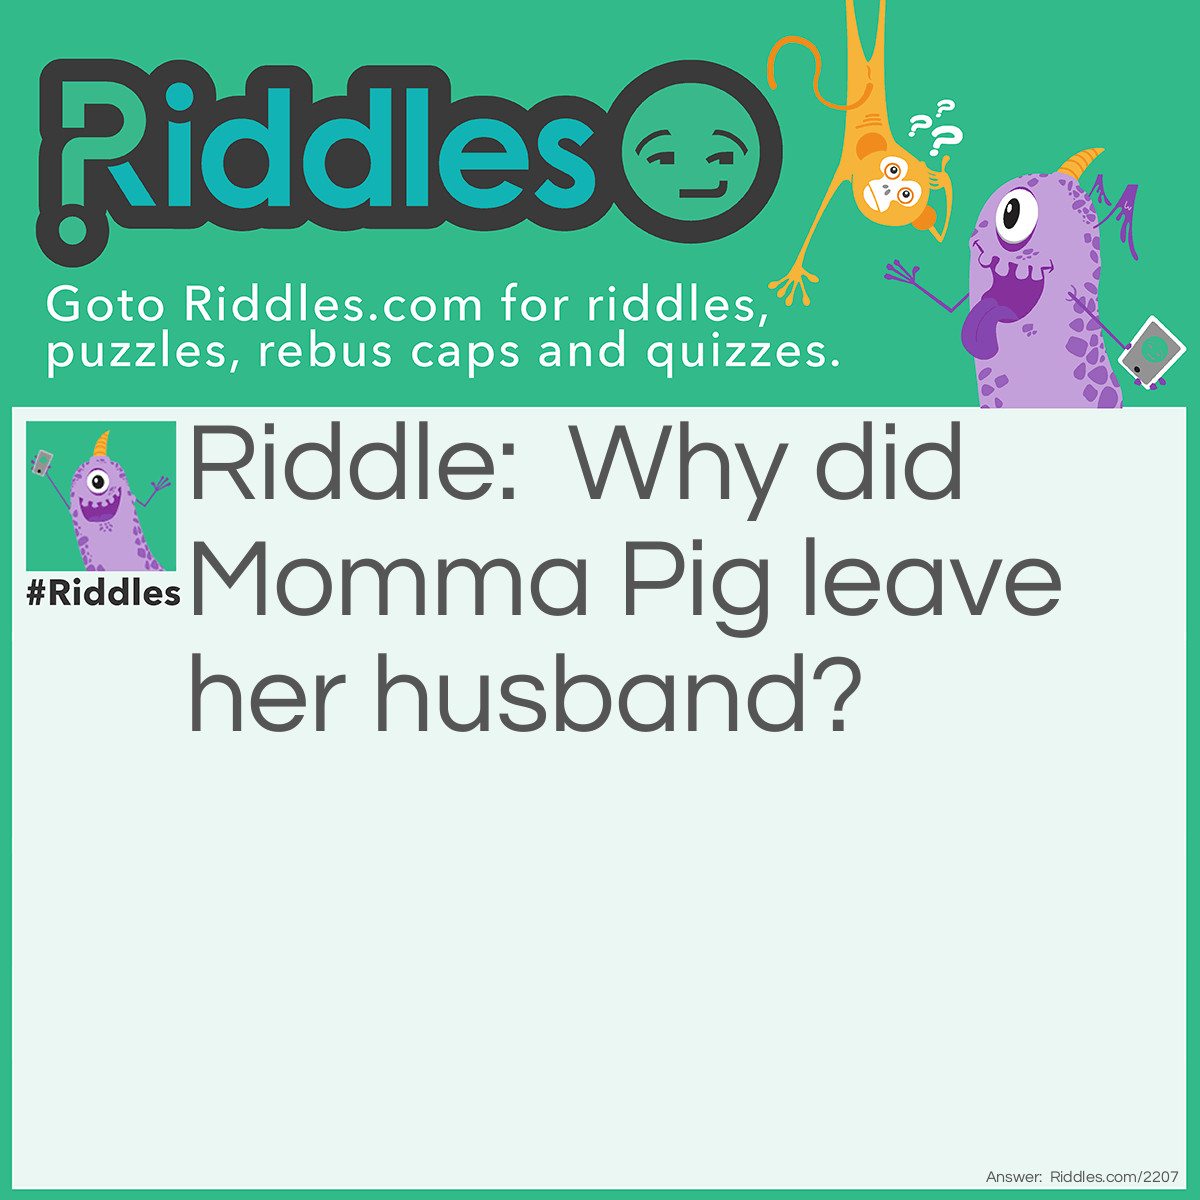 Riddle: Why did Momma Pig leave her husband? Answer: Because he was a boar.